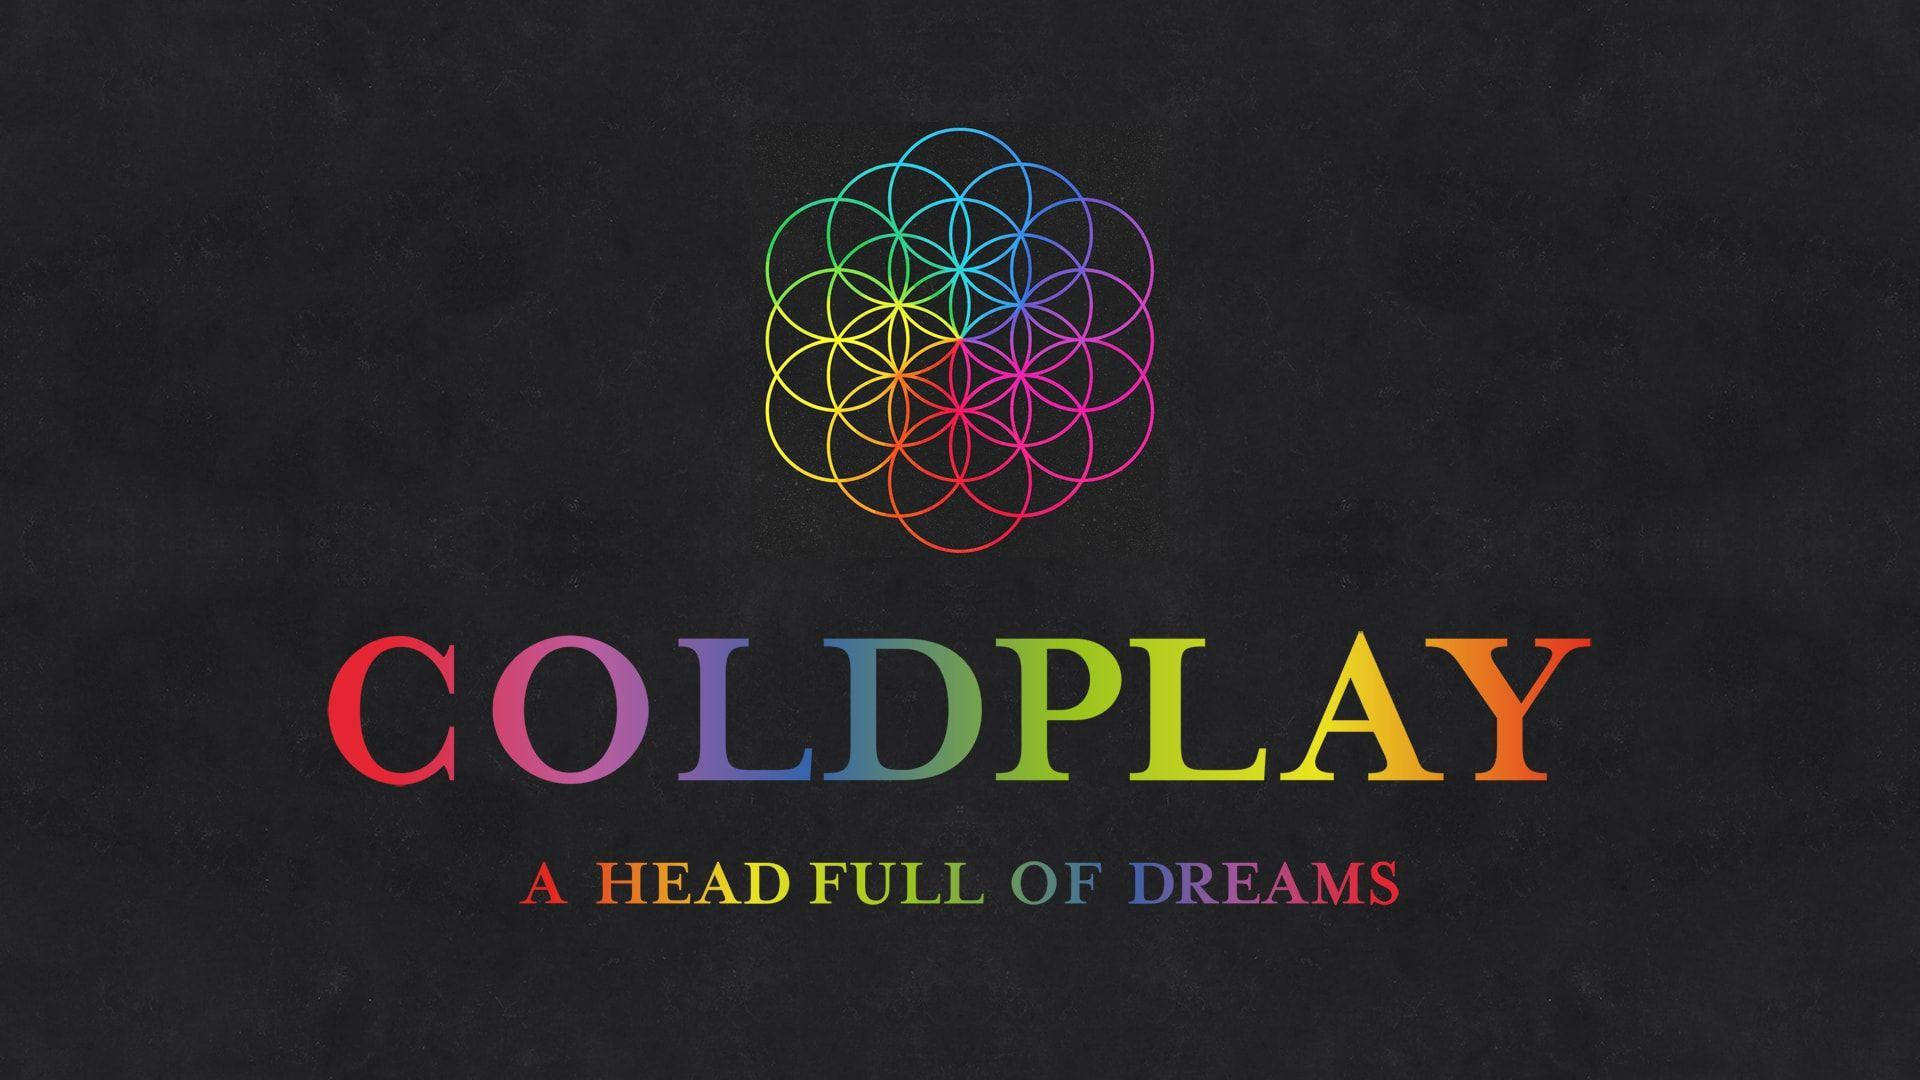 Coldplay Wallpaper Images